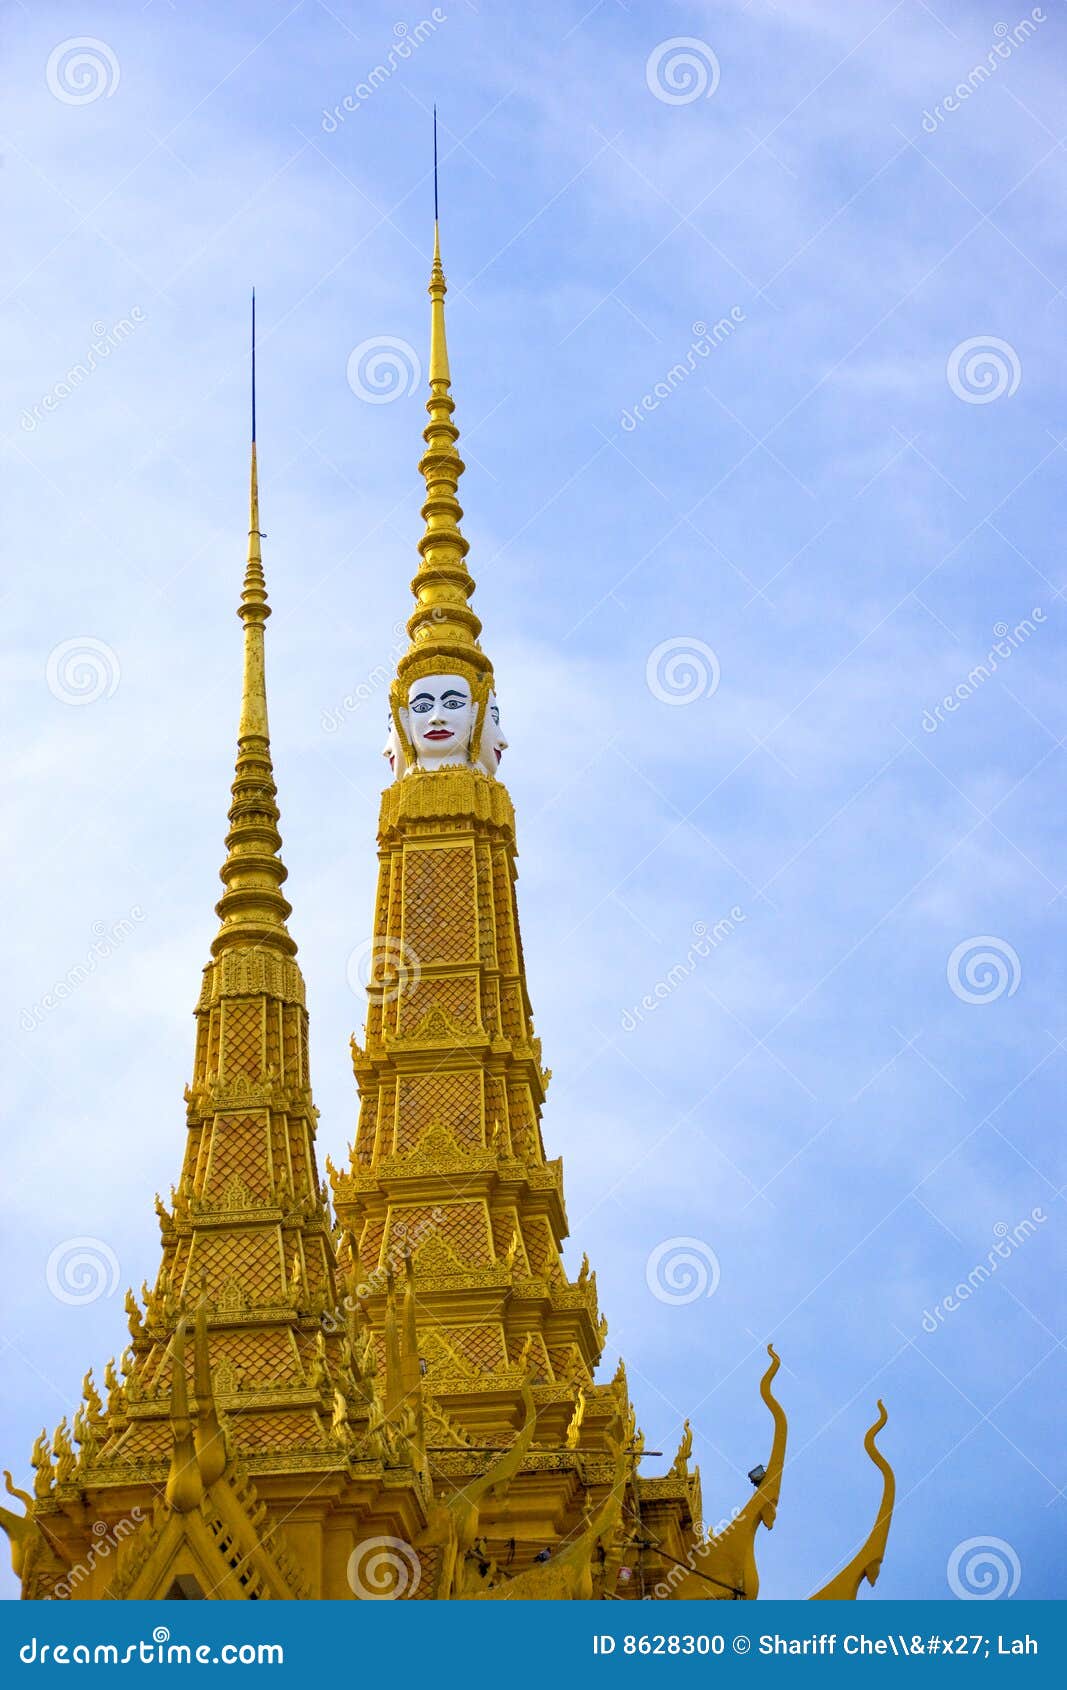 spires of cambodian royal palace building